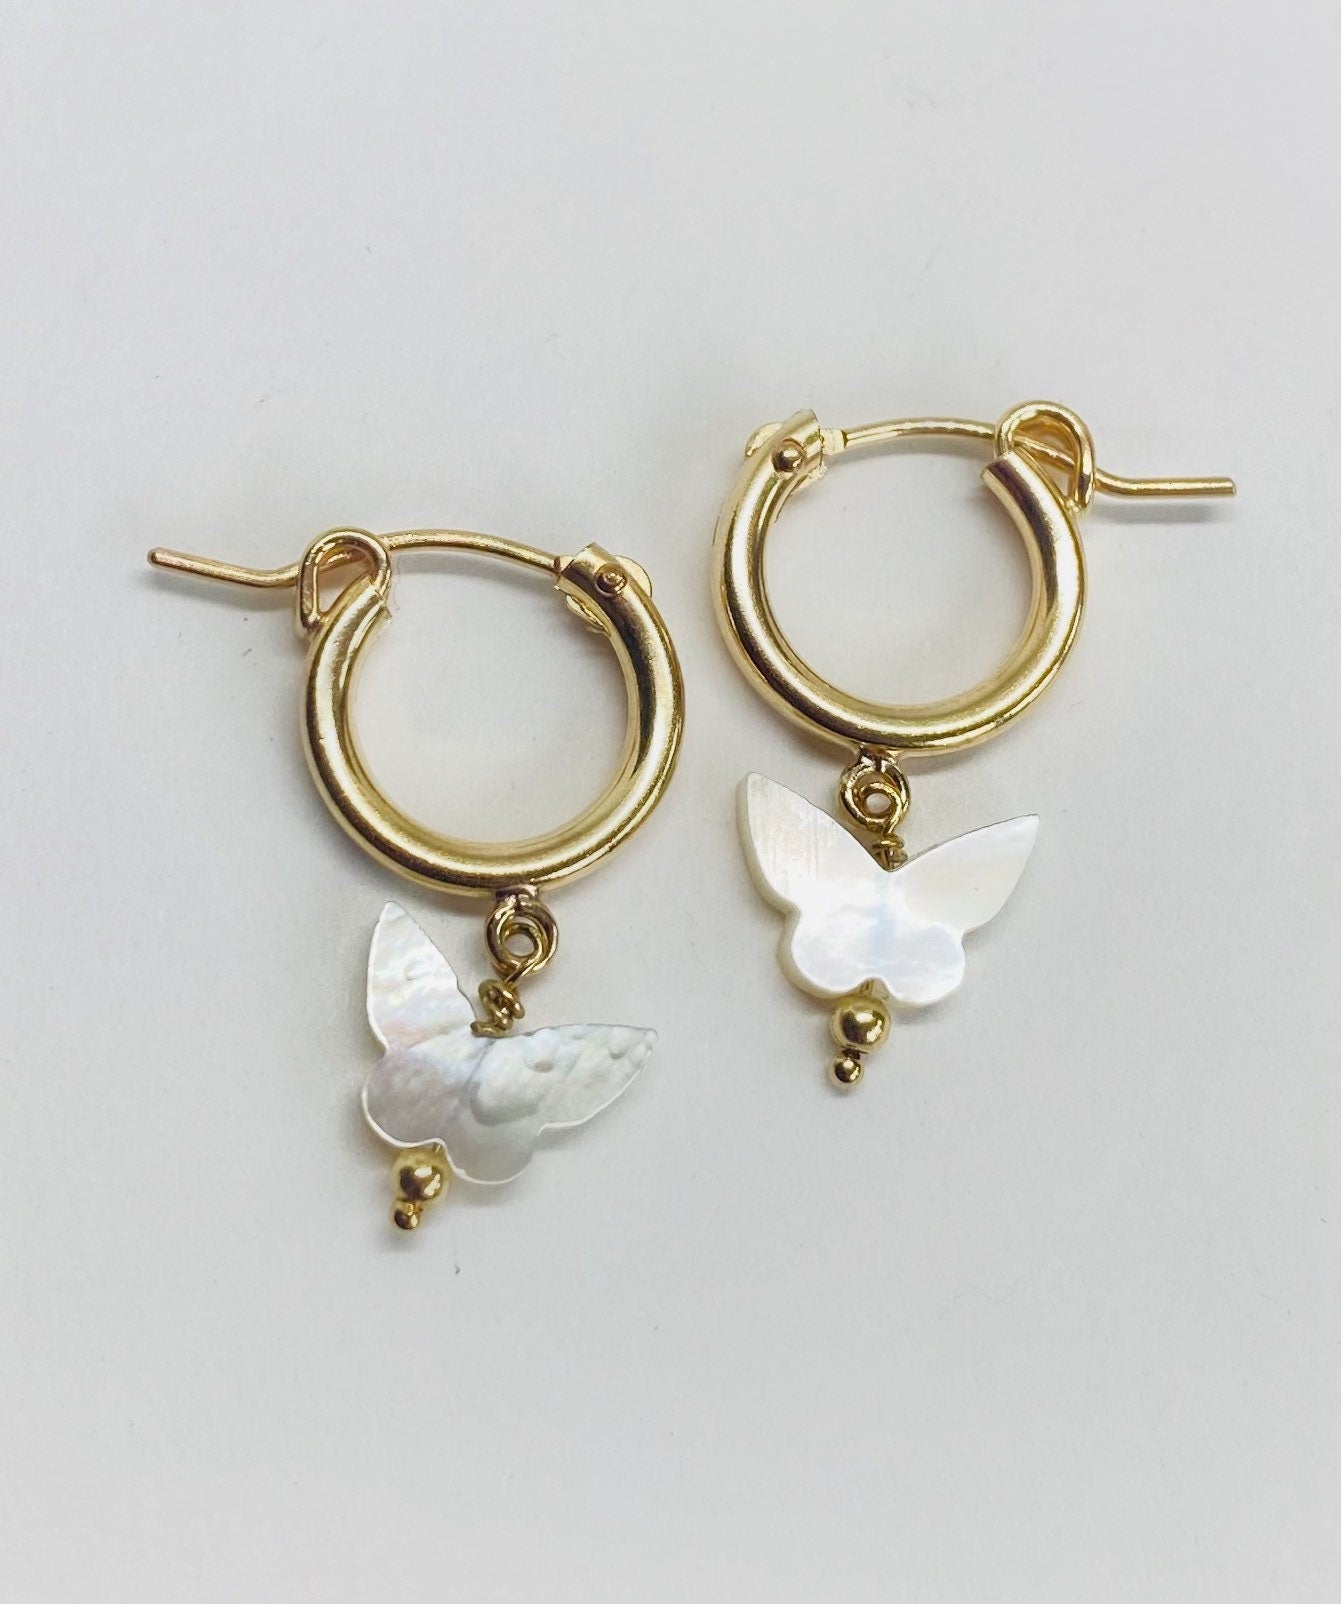 Butterfly 14k Gold Fill Hoops • Gold fill huggies • gold hoops • dainty hoops • mother of Pearl hoops